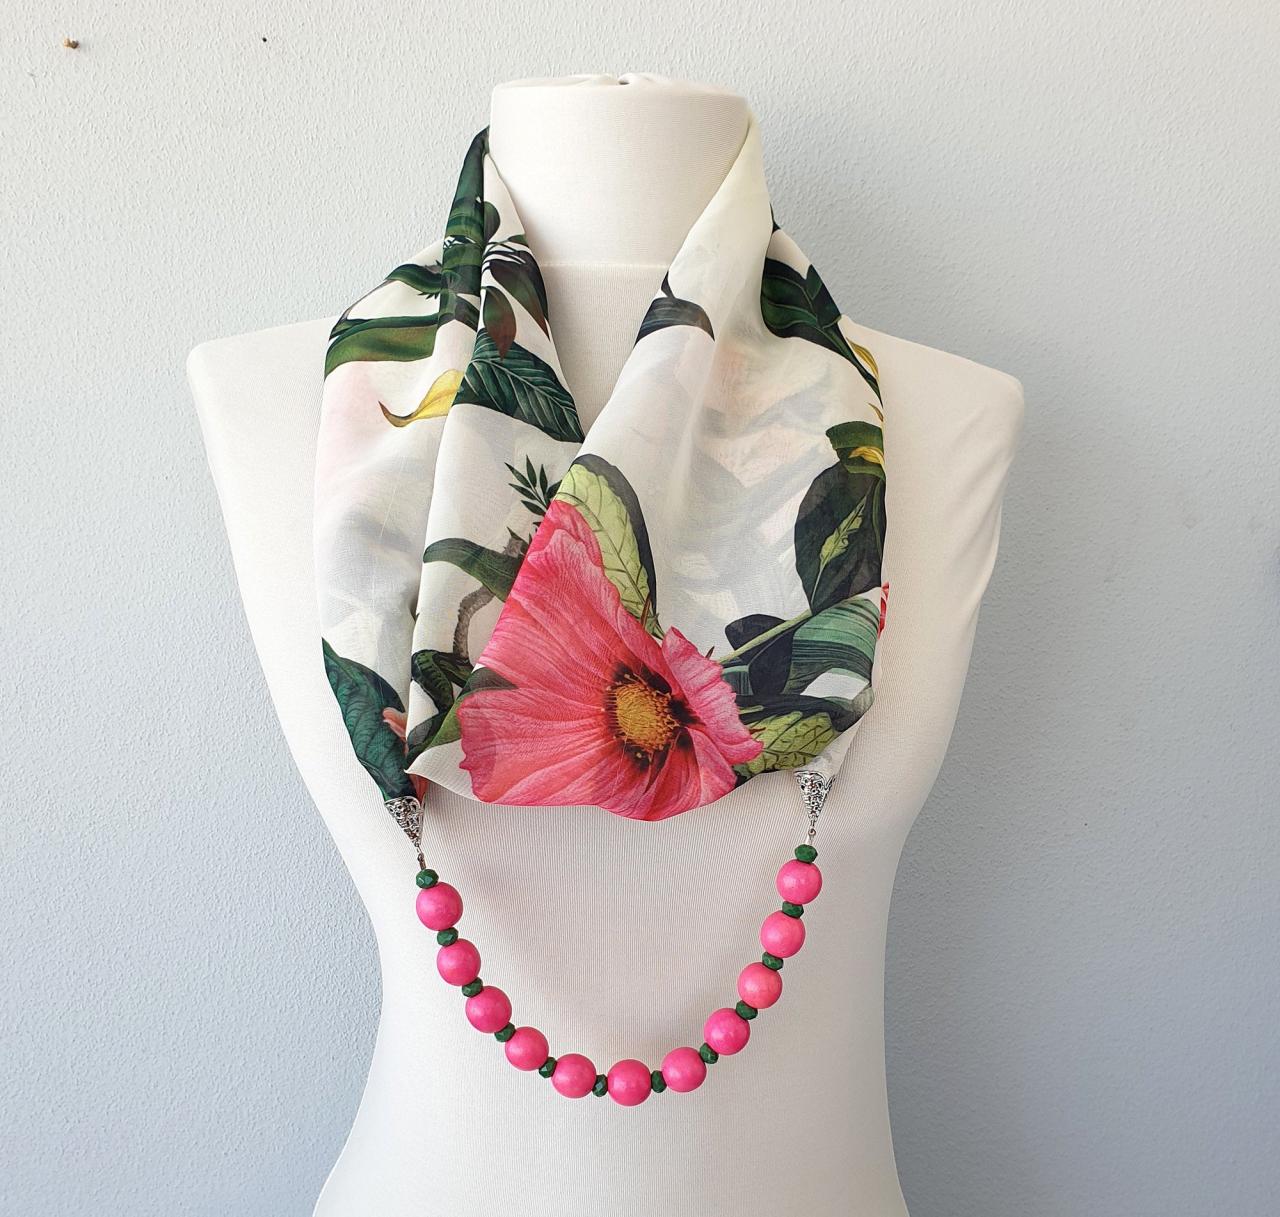 Tropical Plants Scarf Necklace, Beaded Floral Scarf, Christmas Gift For Her